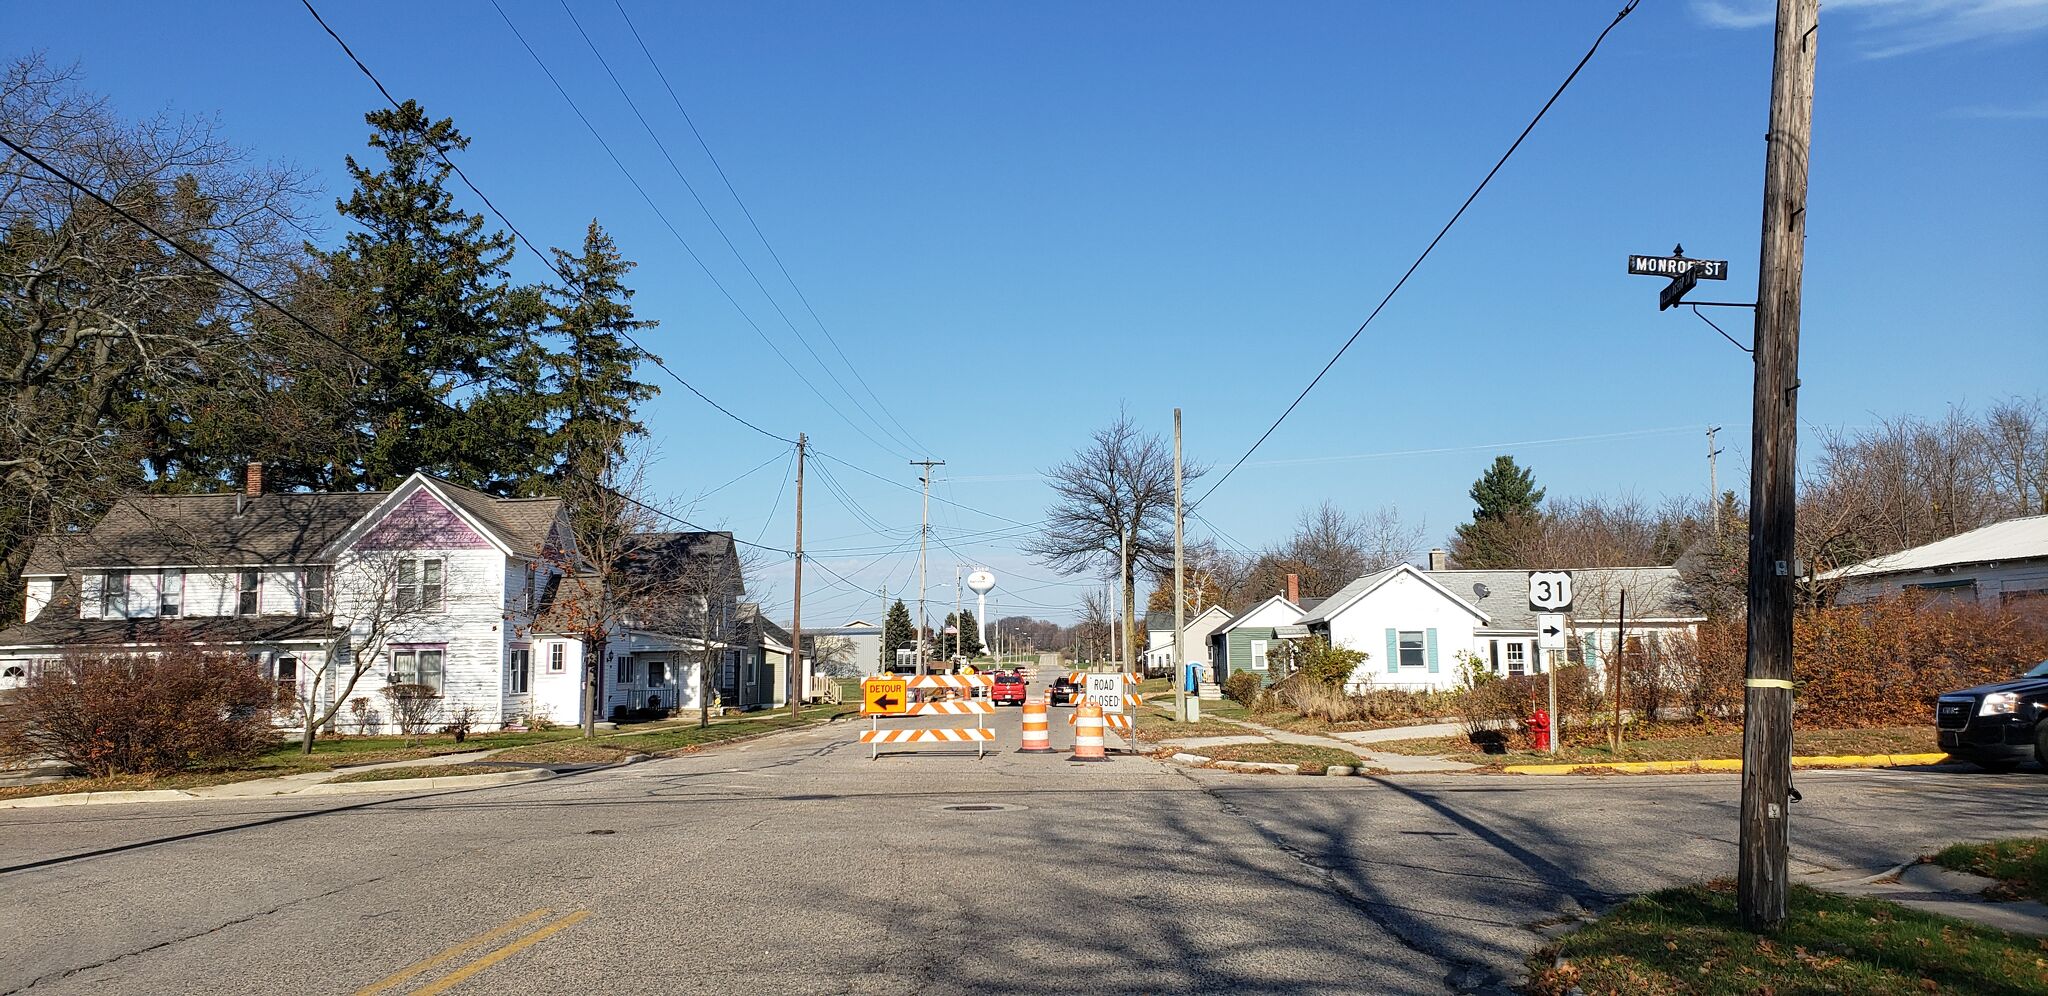  Portions of 2 Manistee streets closed for road work 